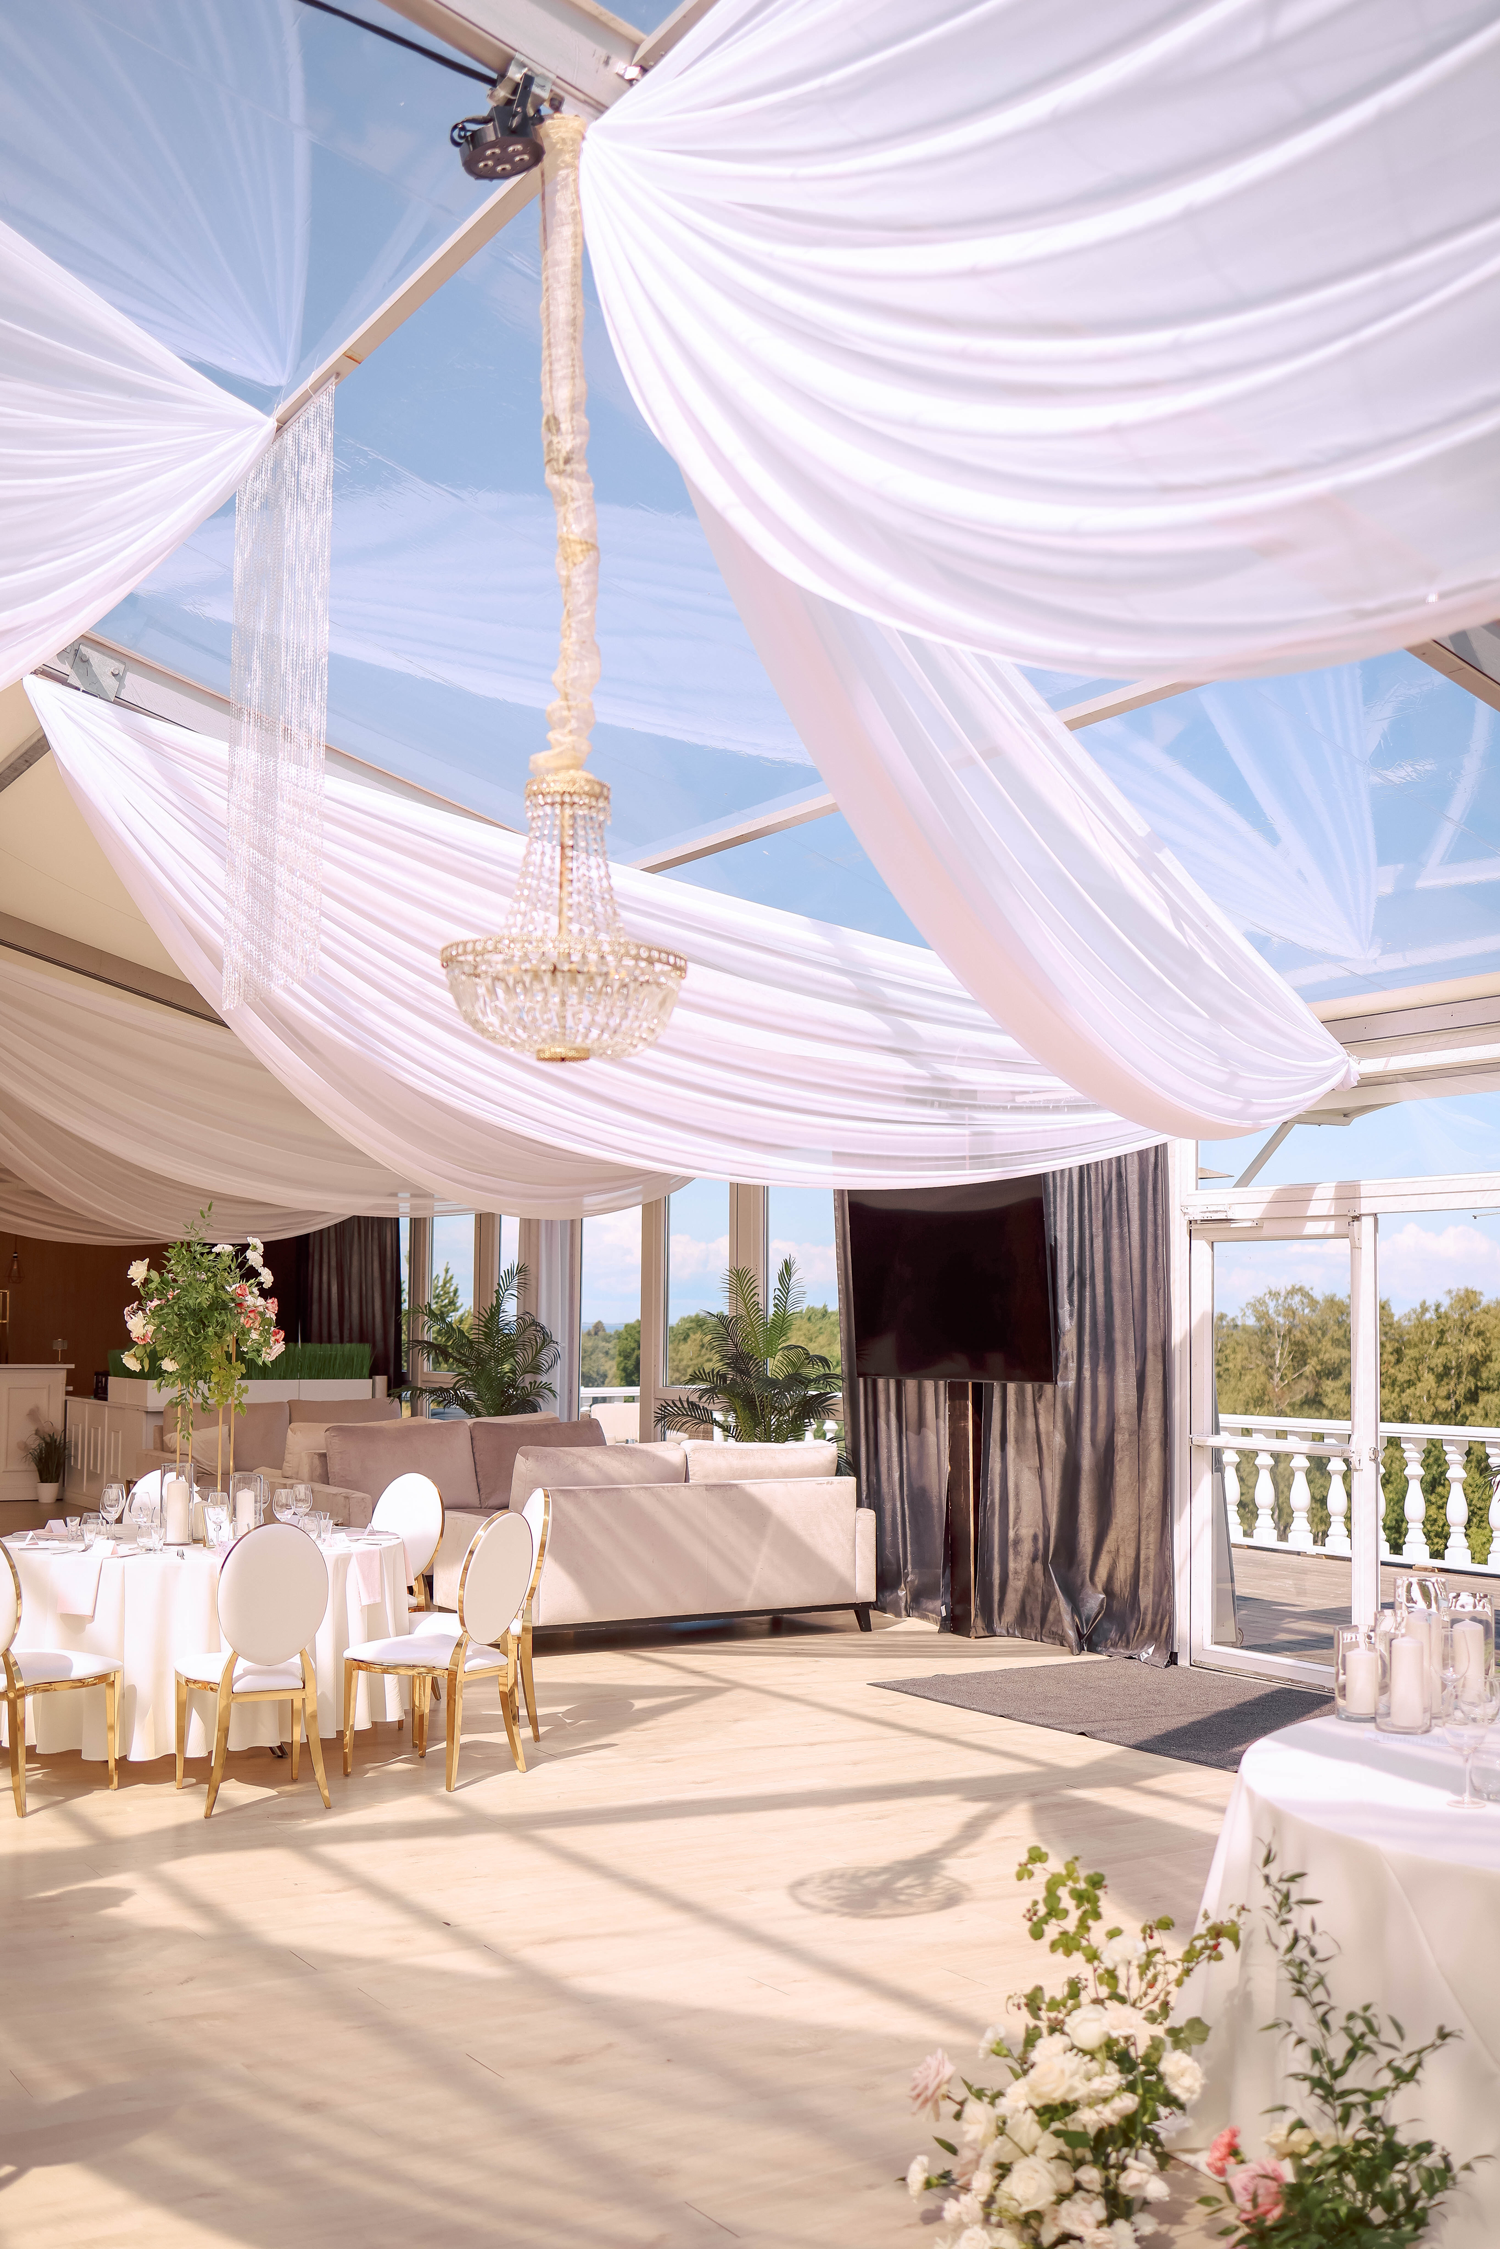 Tips and Tricks for Choosing Your Wedding Venue